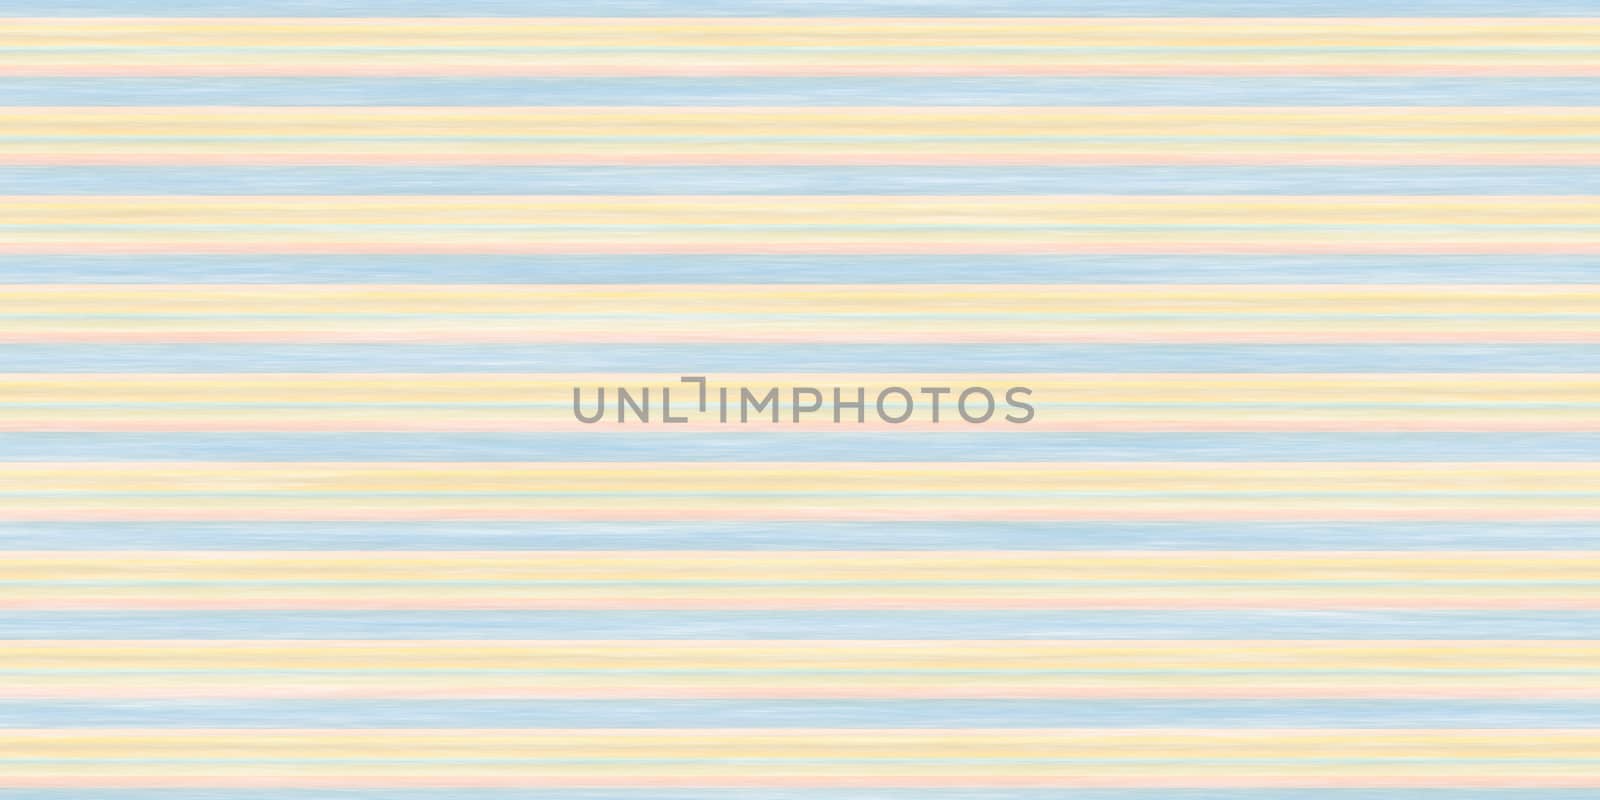 Striped Yellow Blue Scrapbook Sherbert Background. Bright Colored Crumpled Textures. Handmade Scratched Crumpled Paper.